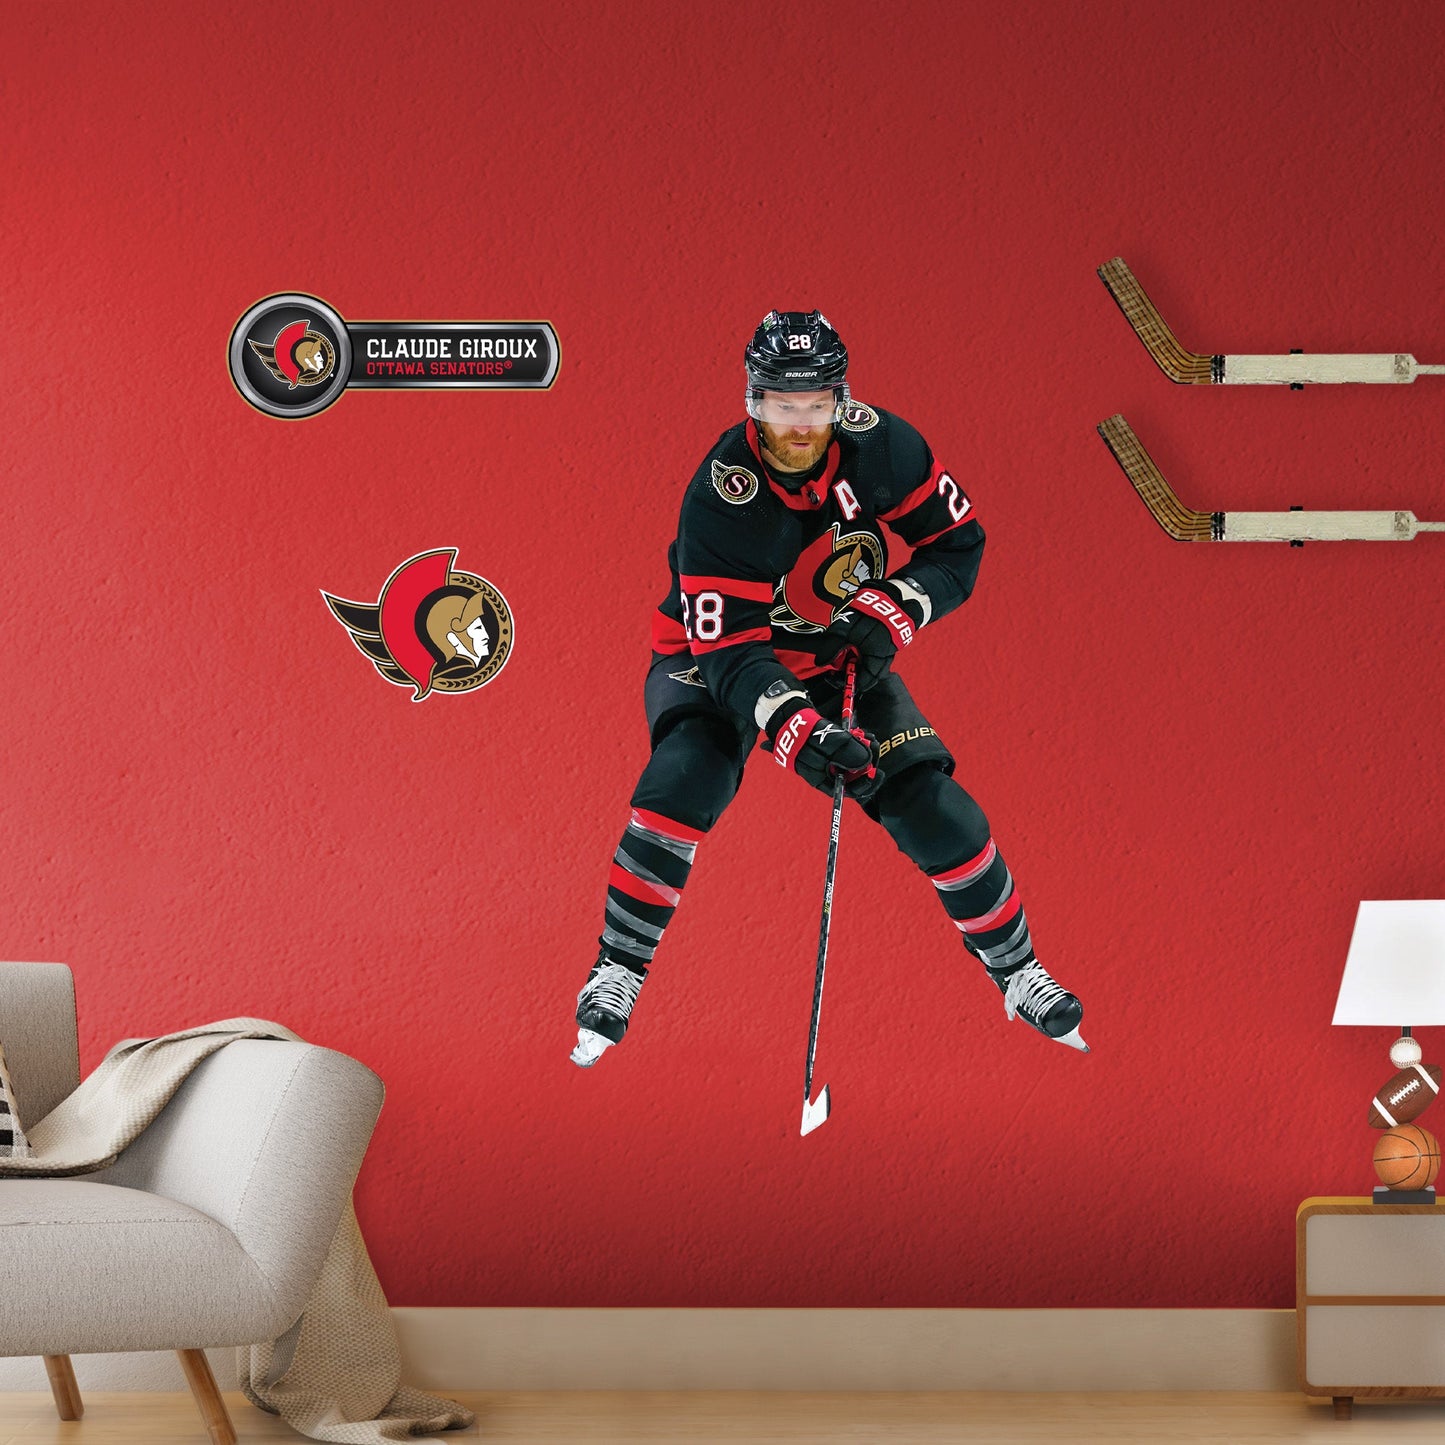 Ottawa Senators: Claude Giroux - Officially Licensed NHL Removable Adhesive Decal